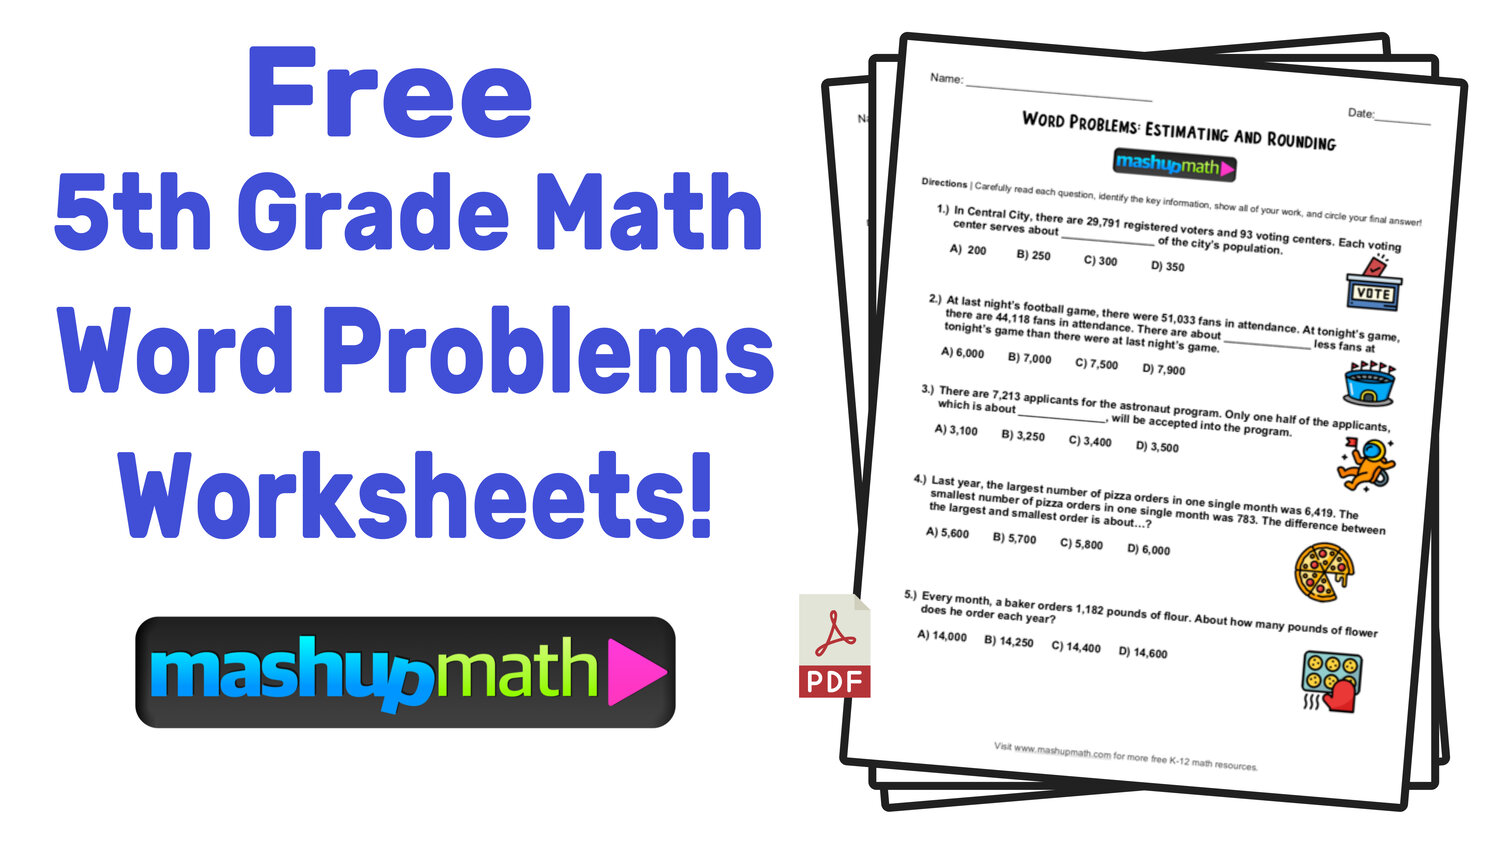 5th-grade-math-word-problems-free-worksheets-with-answers-mashup-math